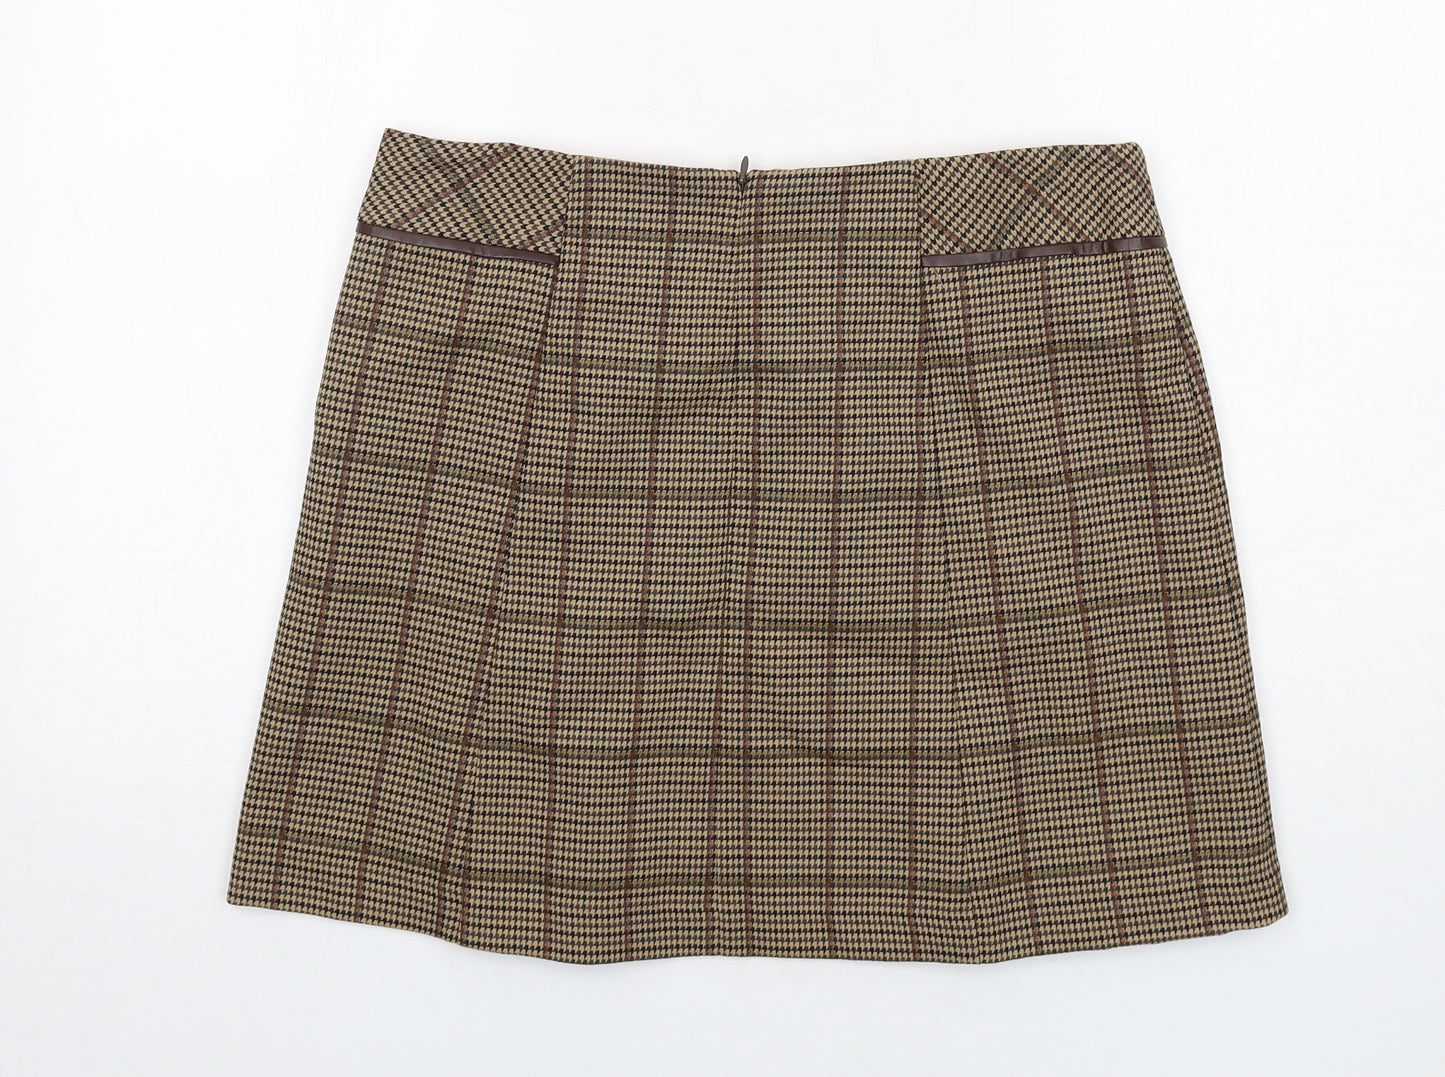 NEXT Womens Brown Plaid Polyester A-Line Skirt Size 14 Zip